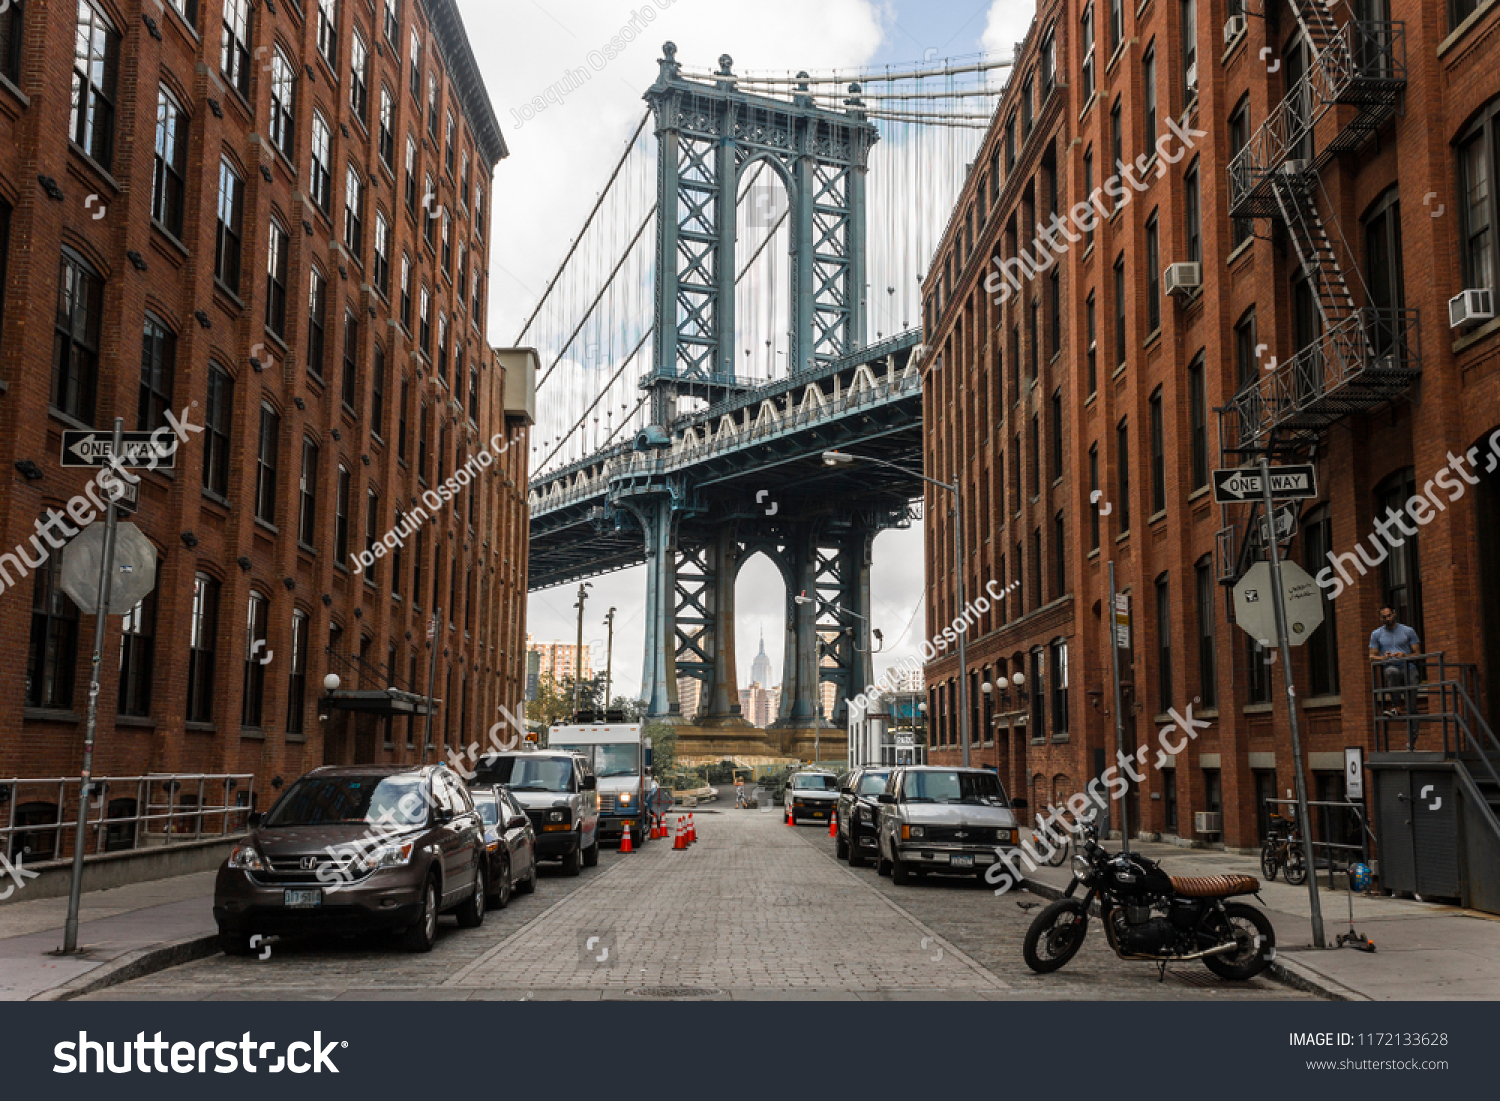 NEW YORK CITY - August 18, 2015: The Manhattan Bridge, a suspension bridge that crosses the East River connecting Lower Manhattan with Downtown Brooklyn, seen from Washington Street #1172133628